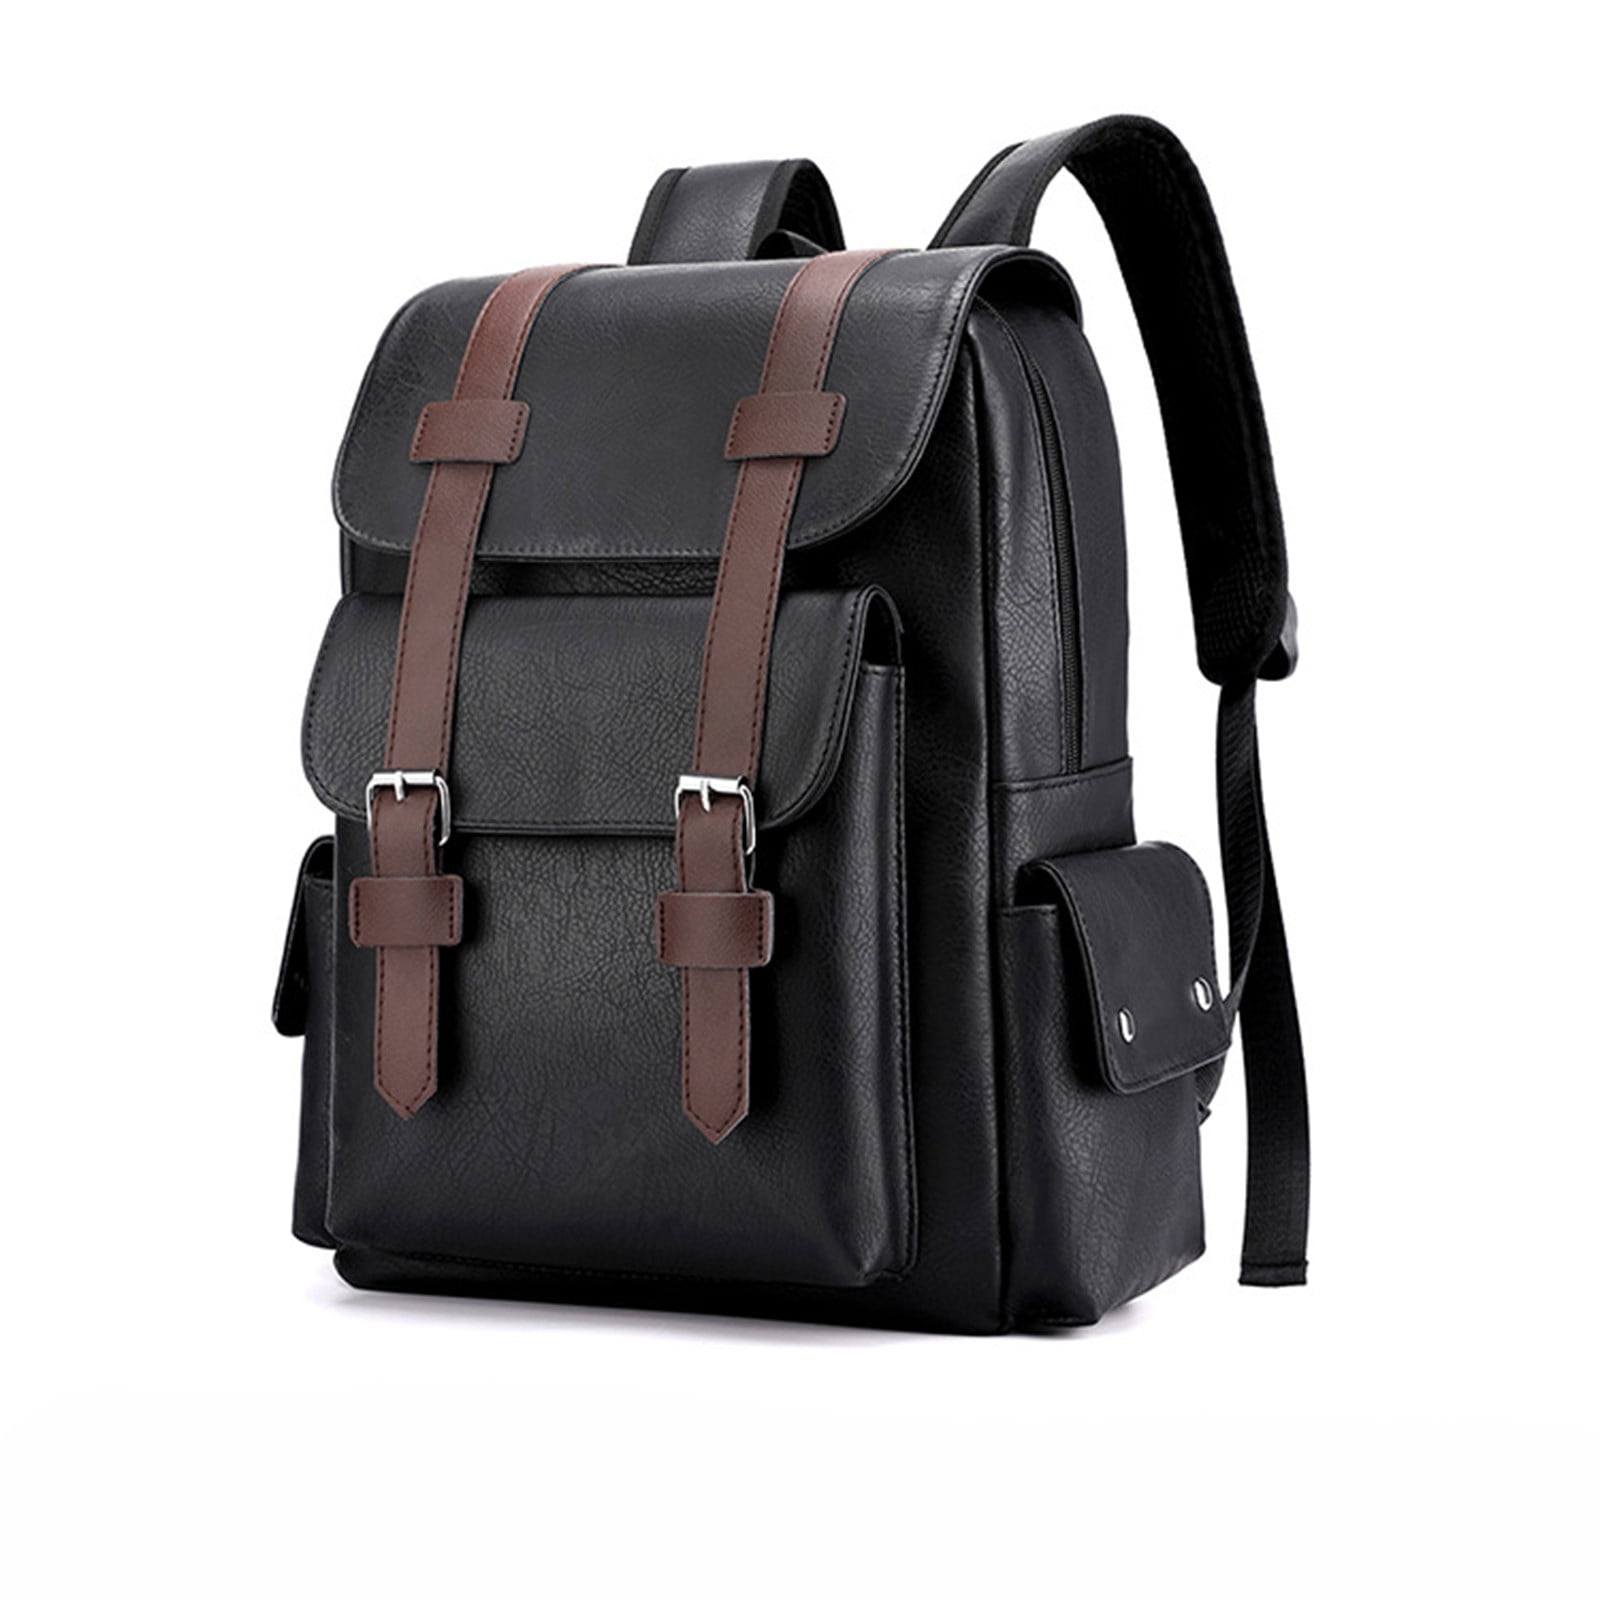 Ovzne Leather Laptop Backpack For Men, Work Business Travel Office ...